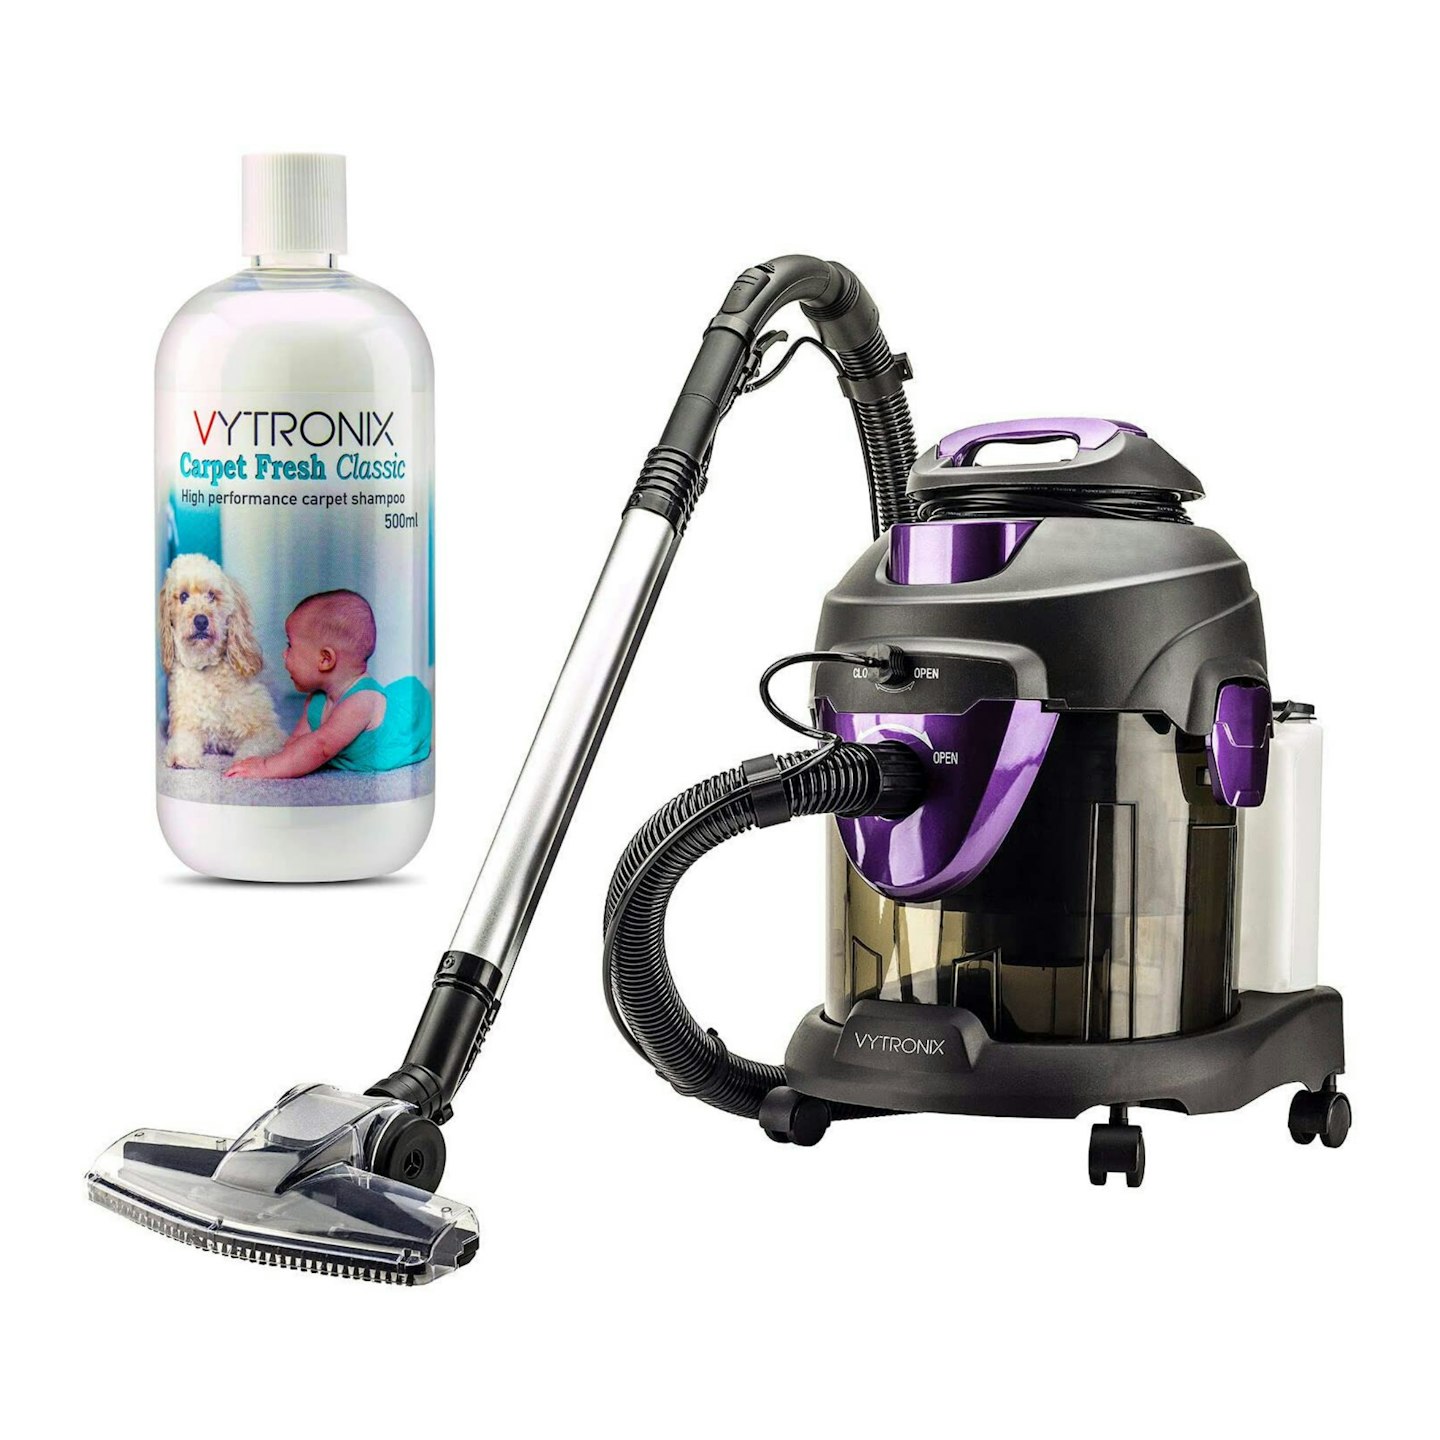 VYTRONIX TUB1600 Multifunction 1600W 4 in 1 Wet & Dry Vacuum Cleaner & Carpet Washer With Blower Function